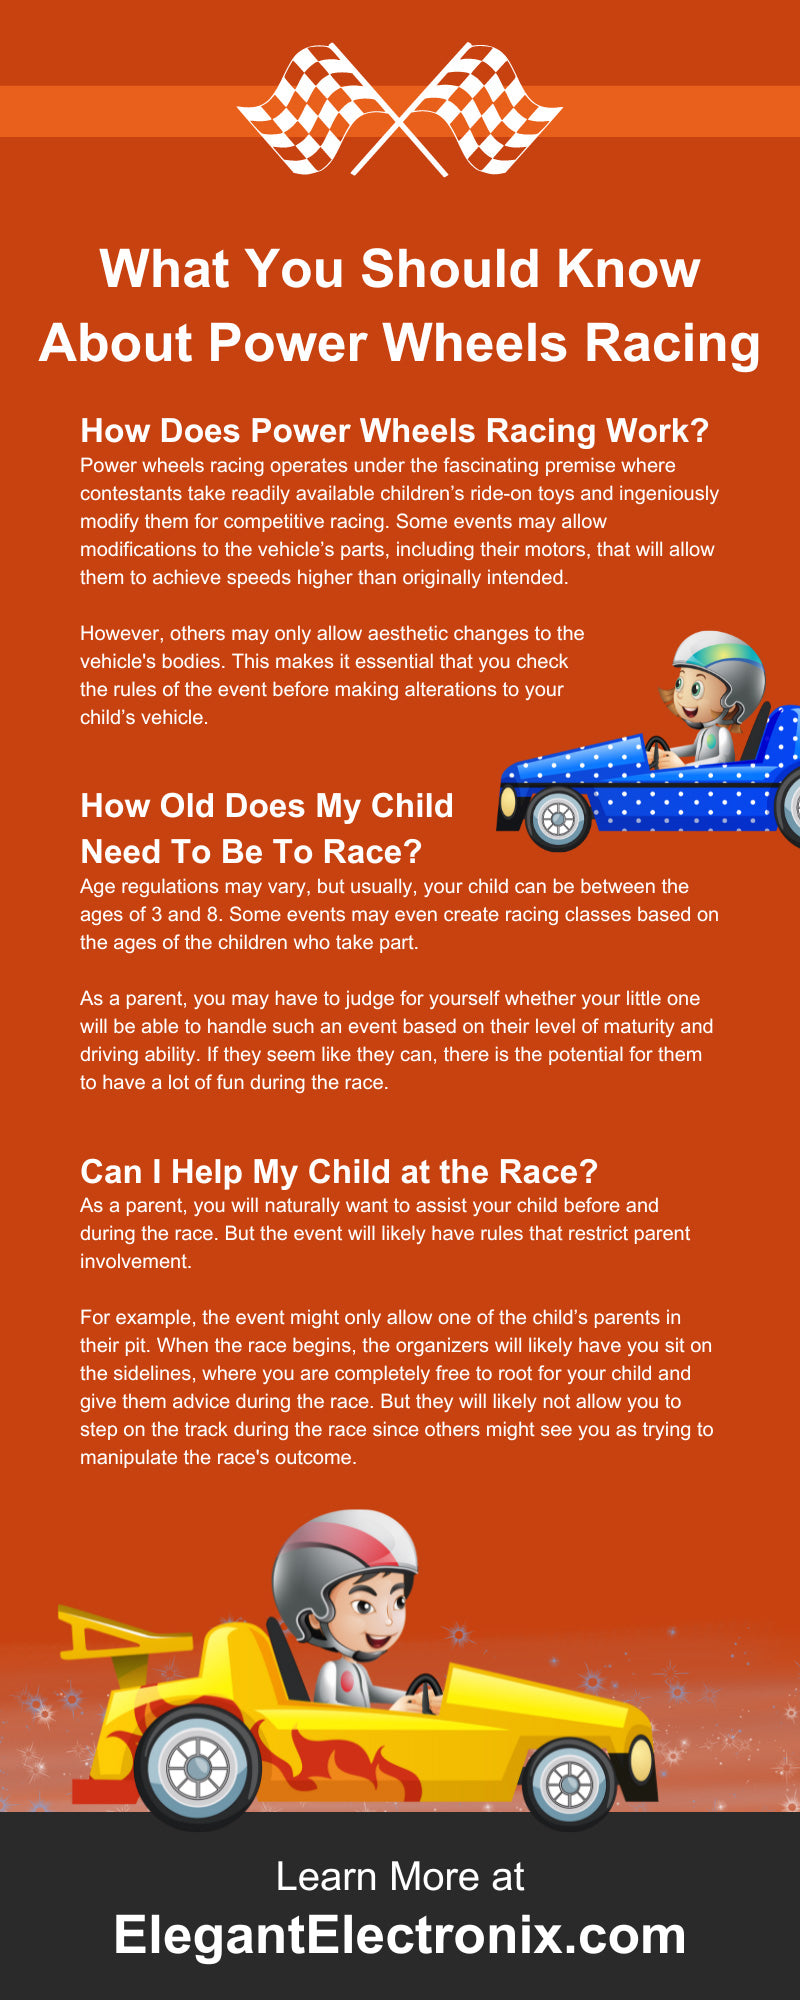 What You Should Know About Power Wheels Racing